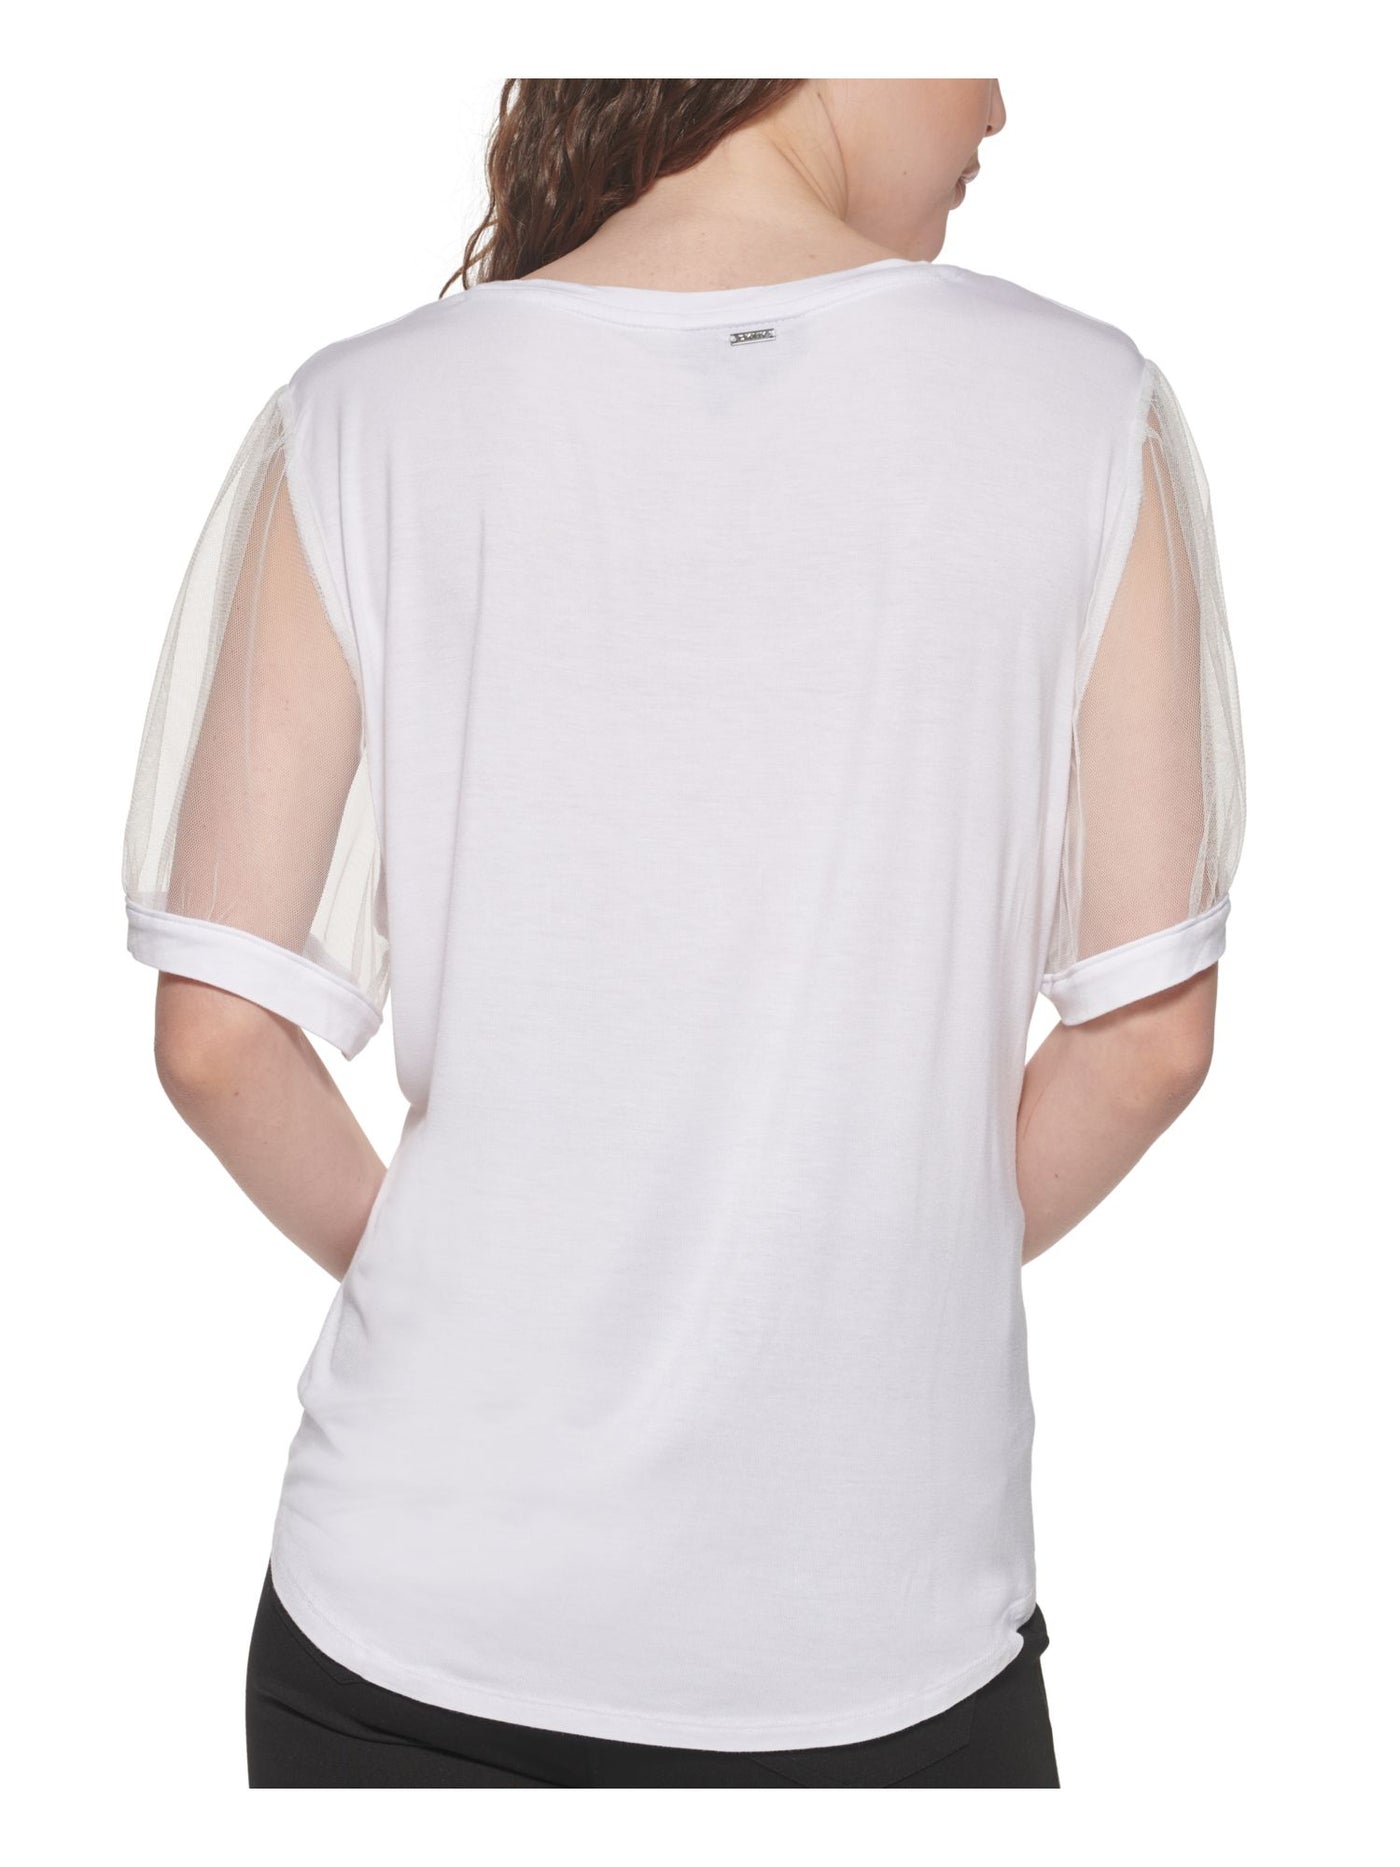 DKNY Womens White Stretch Pouf Sleeve Scoop Neck Top L